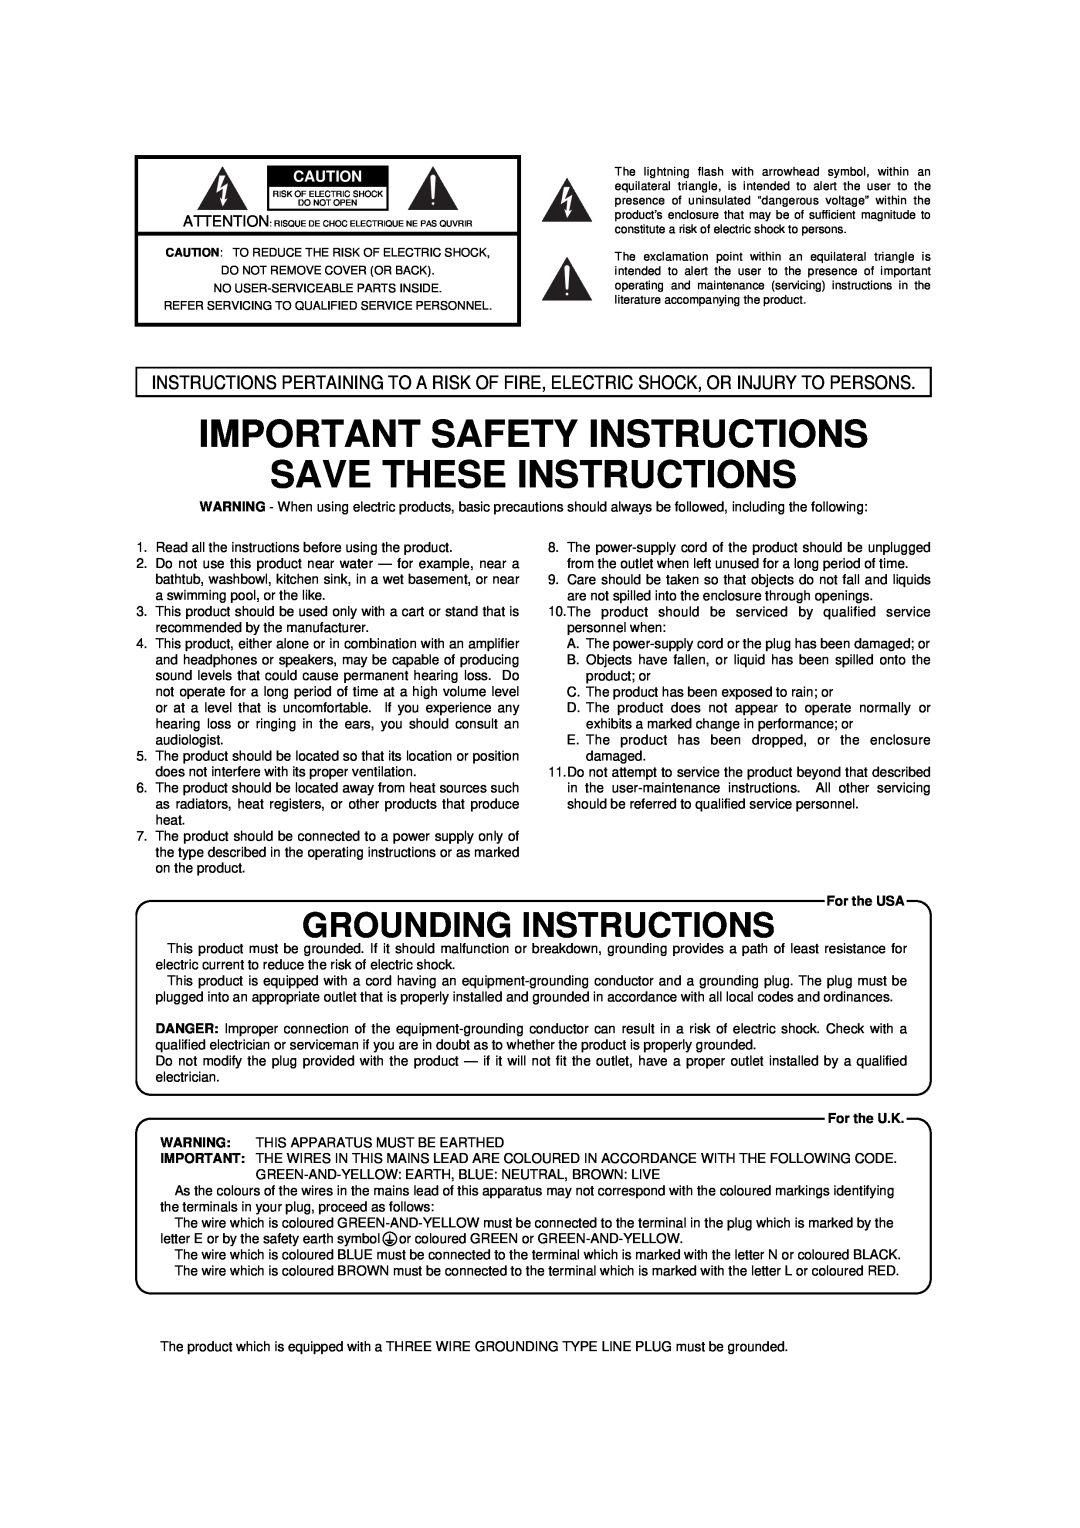 Roland Vs-880 Important Safety Instructions Save These Instructions, Grounding Instructions, For the USA, For the U.K 